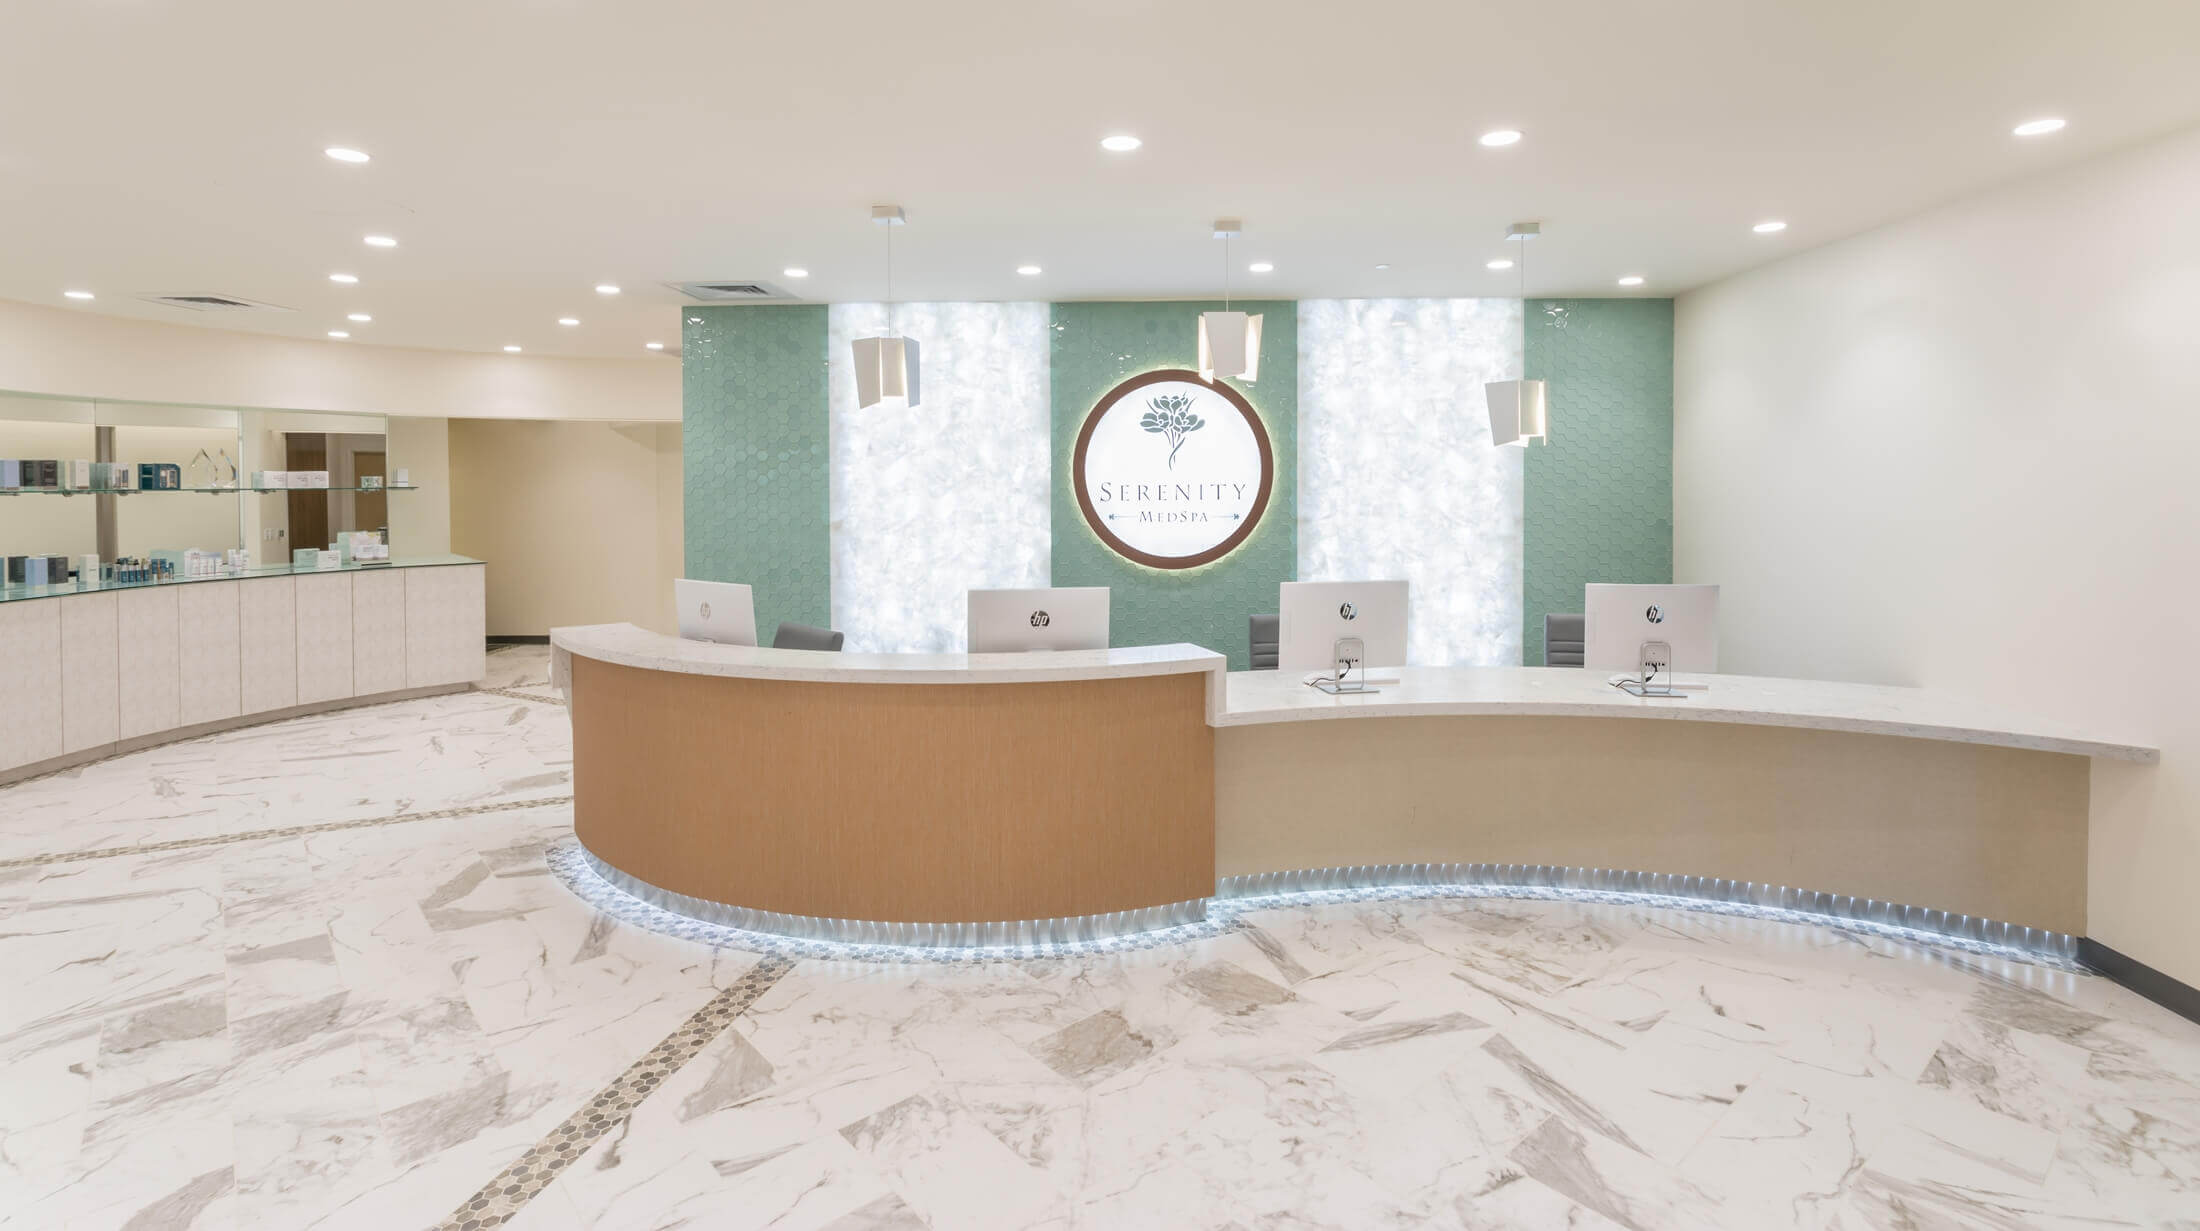 Serenity Med Spa lobby in Burlingame after renovation